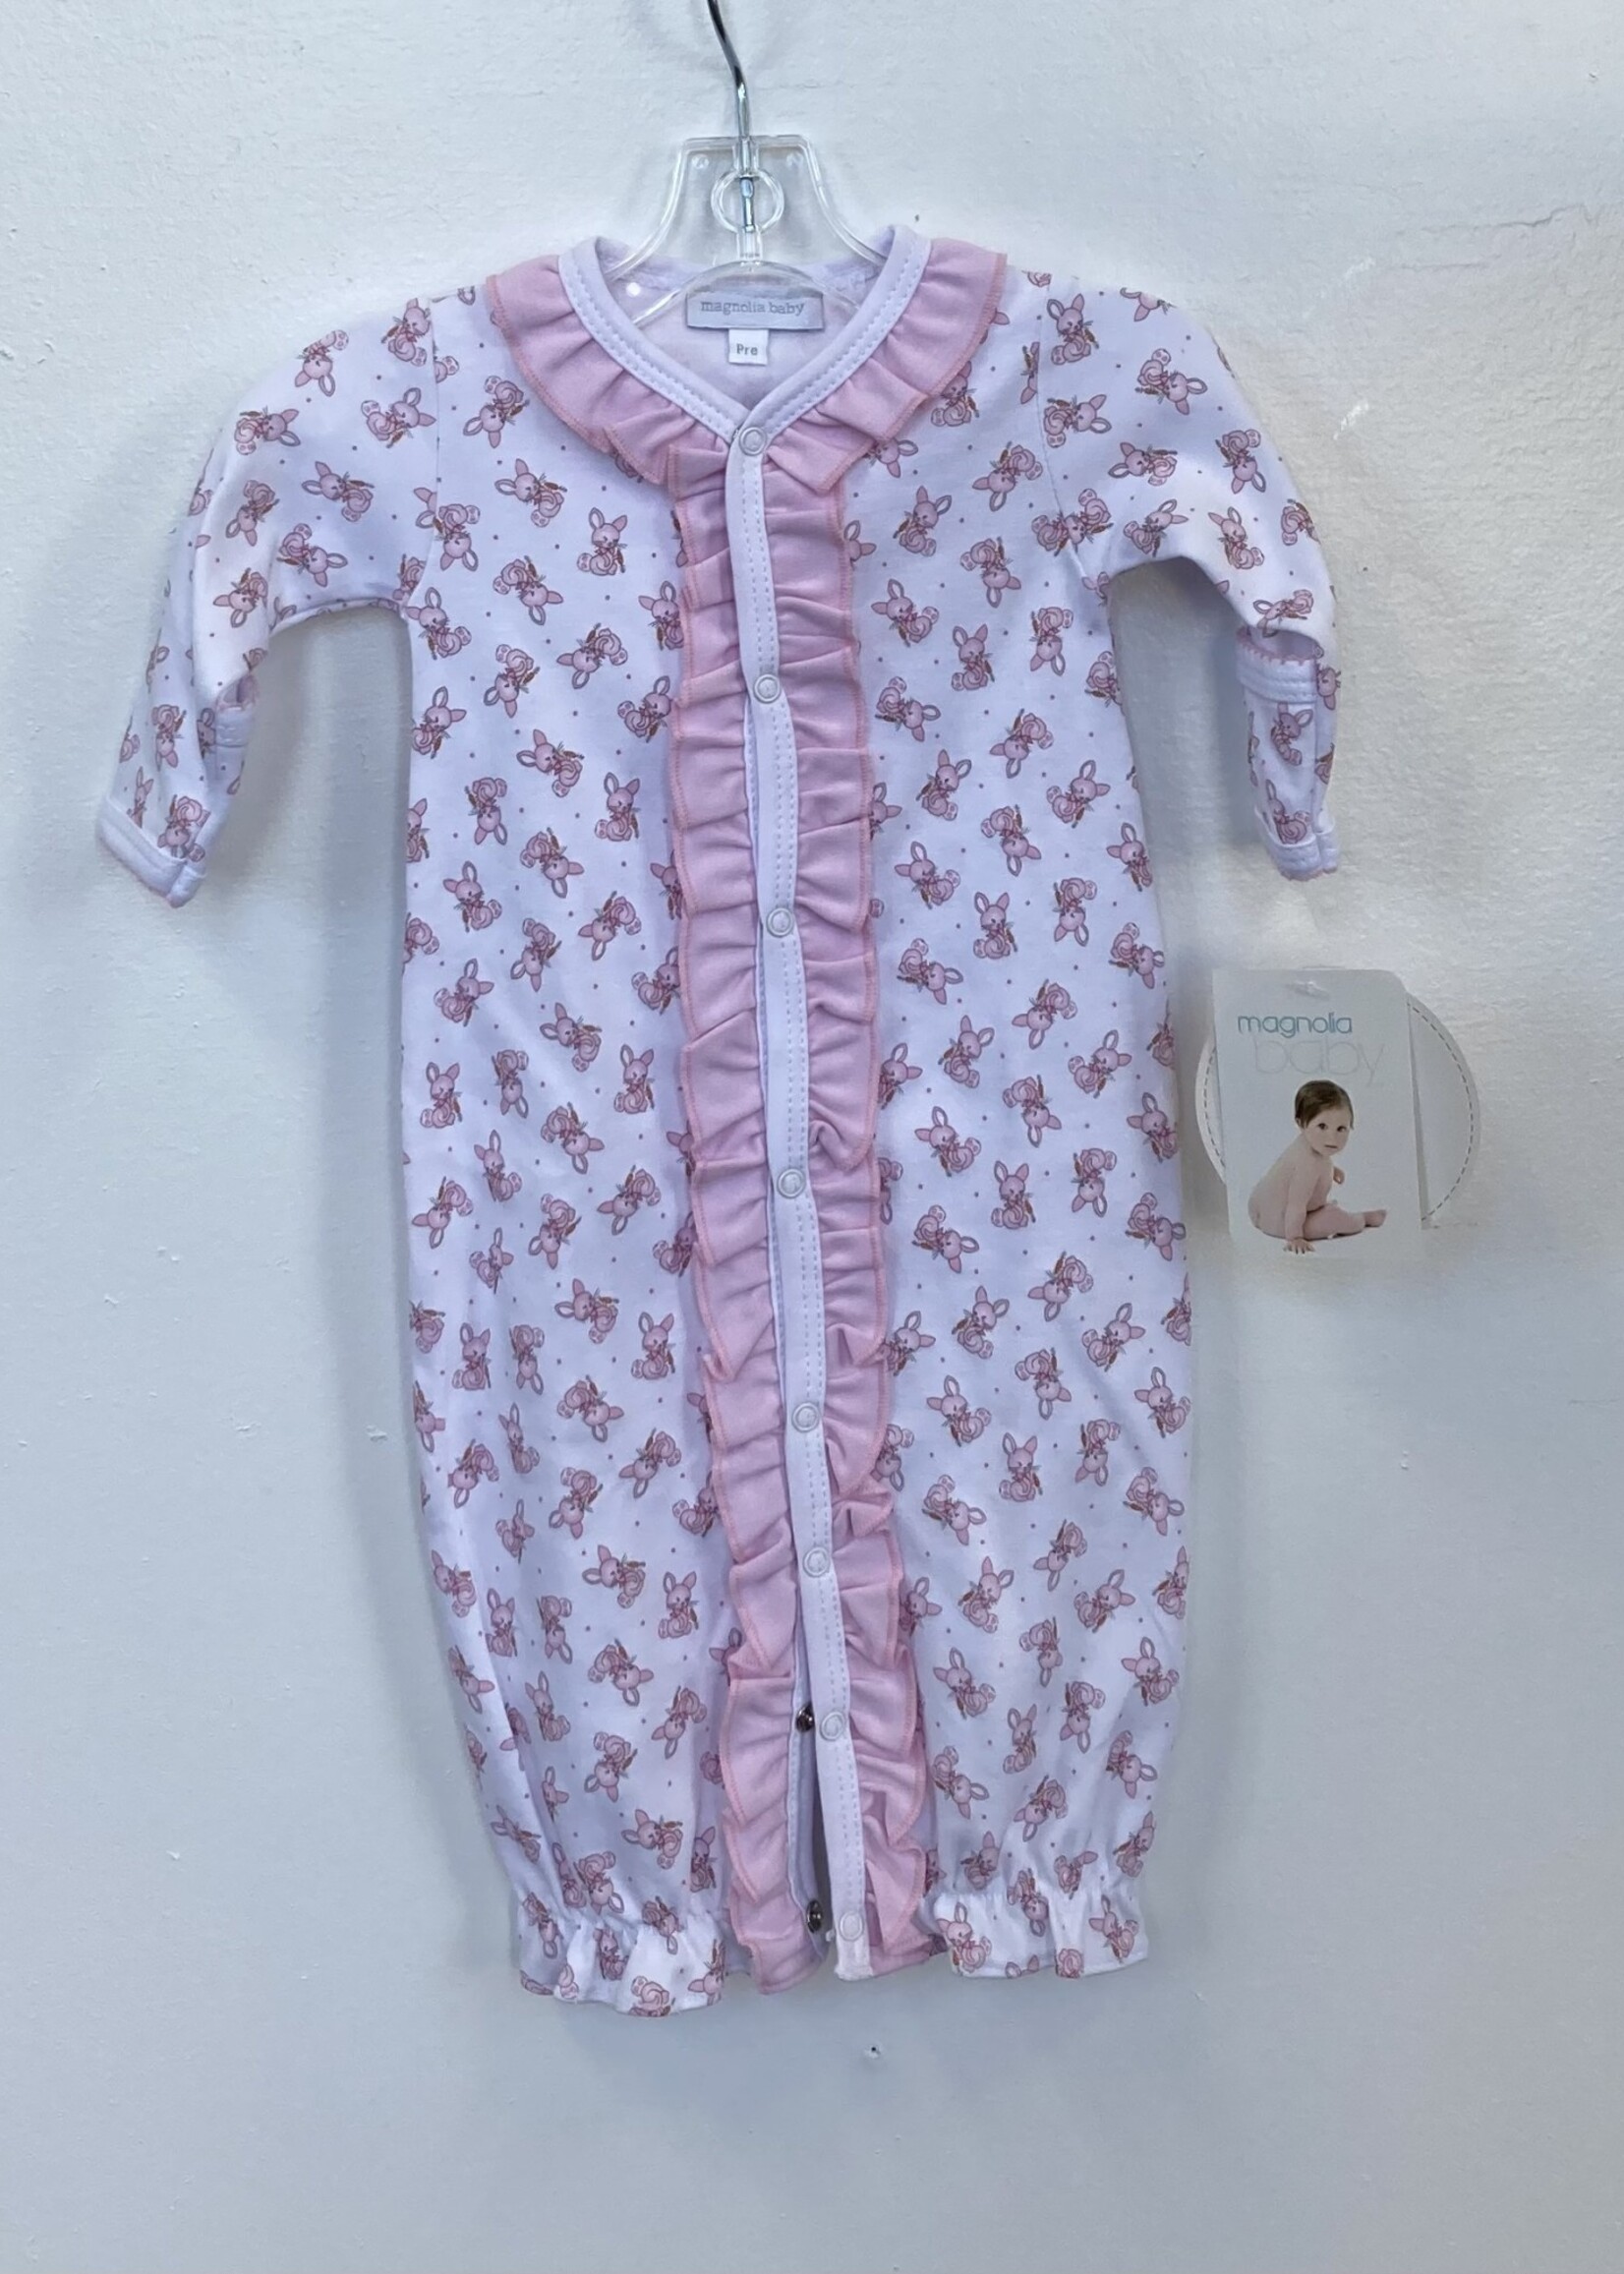 Magnolia Baby Pink/White Bunny Conv. Gown